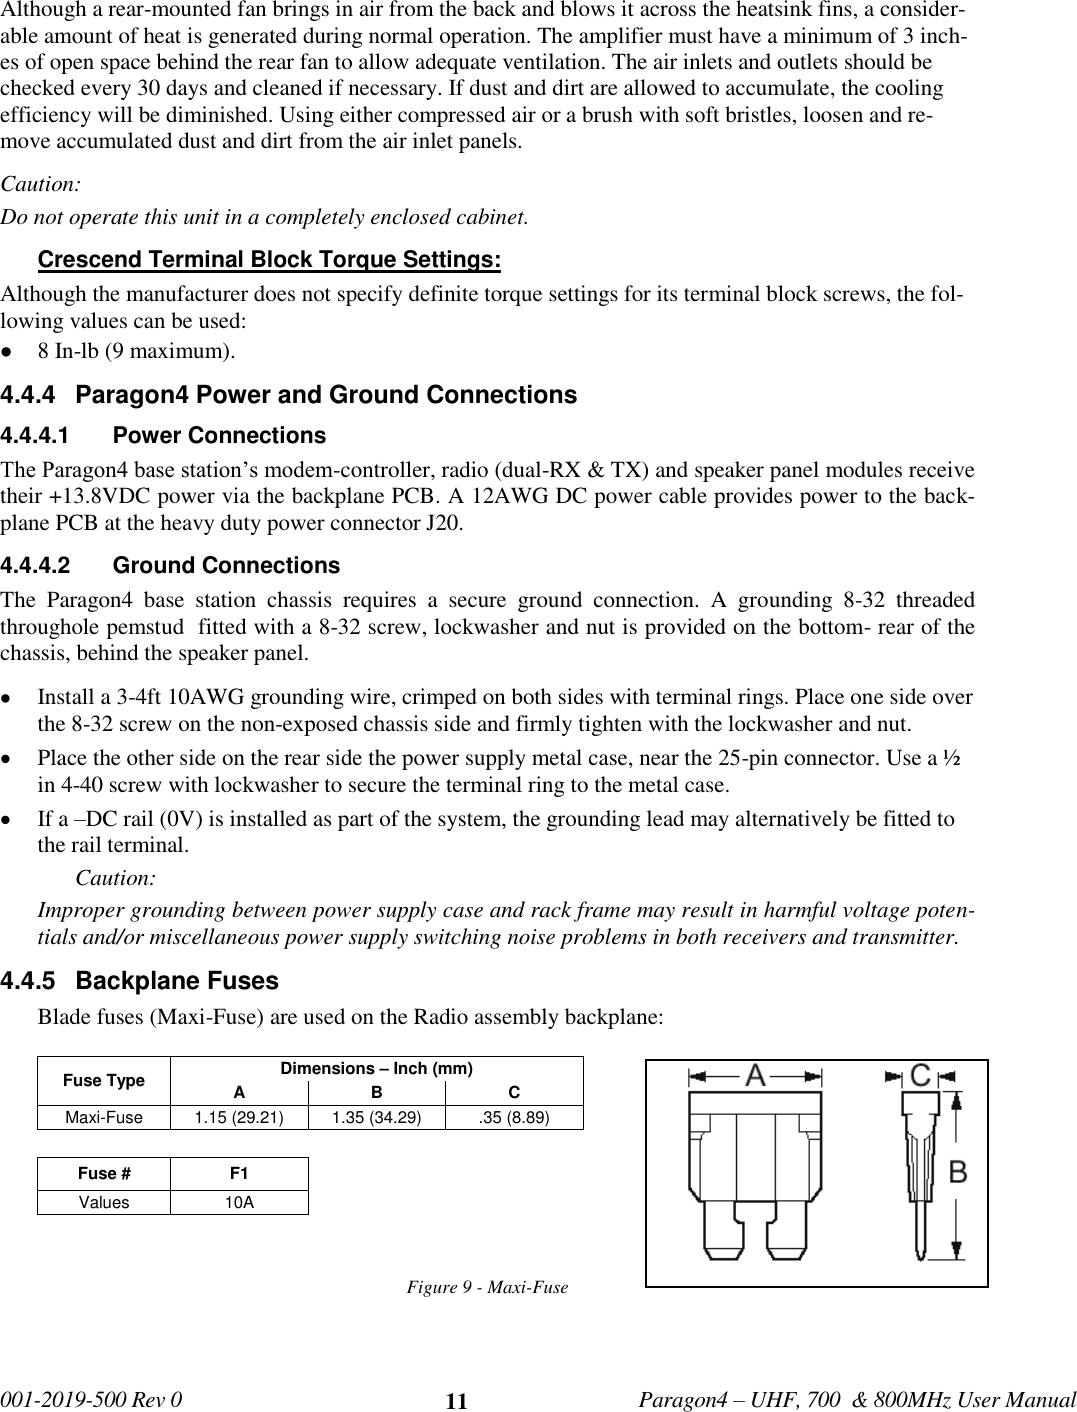   001-2019-500 Rev 0         Paragon4 – UHF, 700  &amp; 800MHz User Manual     11 Although a rear-mounted fan brings in air from the back and blows it across the heatsink fins, a consider-able amount of heat is generated during normal operation. The amplifier must have a minimum of 3 inch-es of open space behind the rear fan to allow adequate ventilation. The air inlets and outlets should be checked every 30 days and cleaned if necessary. If dust and dirt are allowed to accumulate, the cooling efficiency will be diminished. Using either compressed air or a brush with soft bristles, loosen and re-move accumulated dust and dirt from the air inlet panels. Caution:  Do not operate this unit in a completely enclosed cabinet. Crescend Terminal Block Torque Settings:  Although the manufacturer does not specify definite torque settings for its terminal block screws, the fol-lowing values can be used:  8 In-lb (9 maximum).  4.4.4  Paragon4 Power and Ground Connections 4.4.4.1  Power Connections  The Paragon4 base station’s modem-controller, radio (dual-RX &amp; TX) and speaker panel modules receive their +13.8VDC power via the backplane PCB. A 12AWG DC power cable provides power to the back-plane PCB at the heavy duty power connector J20.     4.4.4.2  Ground Connections  The  Paragon4  base  station  chassis  requires  a  secure  ground  connection.  A  grounding  8-32  threaded throughole pemstud  fitted with a 8-32 screw, lockwasher and nut is provided on the bottom- rear of the chassis, behind the speaker panel.   Install a 3-4ft 10AWG grounding wire, crimped on both sides with terminal rings. Place one side over the 8-32 screw on the non-exposed chassis side and firmly tighten with the lockwasher and nut.   Place the other side on the rear side the power supply metal case, near the 25-pin connector. Use a ½ in 4-40 screw with lockwasher to secure the terminal ring to the metal case.   If a –DC rail (0V) is installed as part of the system, the grounding lead may alternatively be fitted to the rail terminal. Caution: Improper grounding between power supply case and rack frame may result in harmful voltage poten-tials and/or miscellaneous power supply switching noise problems in both receivers and transmitter. 4.4.5  Backplane Fuses Blade fuses (Maxi-Fuse) are used on the Radio assembly backplane:  Fuse Type Dimensions – Inch (mm) A B C Maxi-Fuse 1.15 (29.21) 1.35 (34.29) .35 (8.89)  Fuse # F1 Values 10A   Figure 9 - Maxi-Fuse     